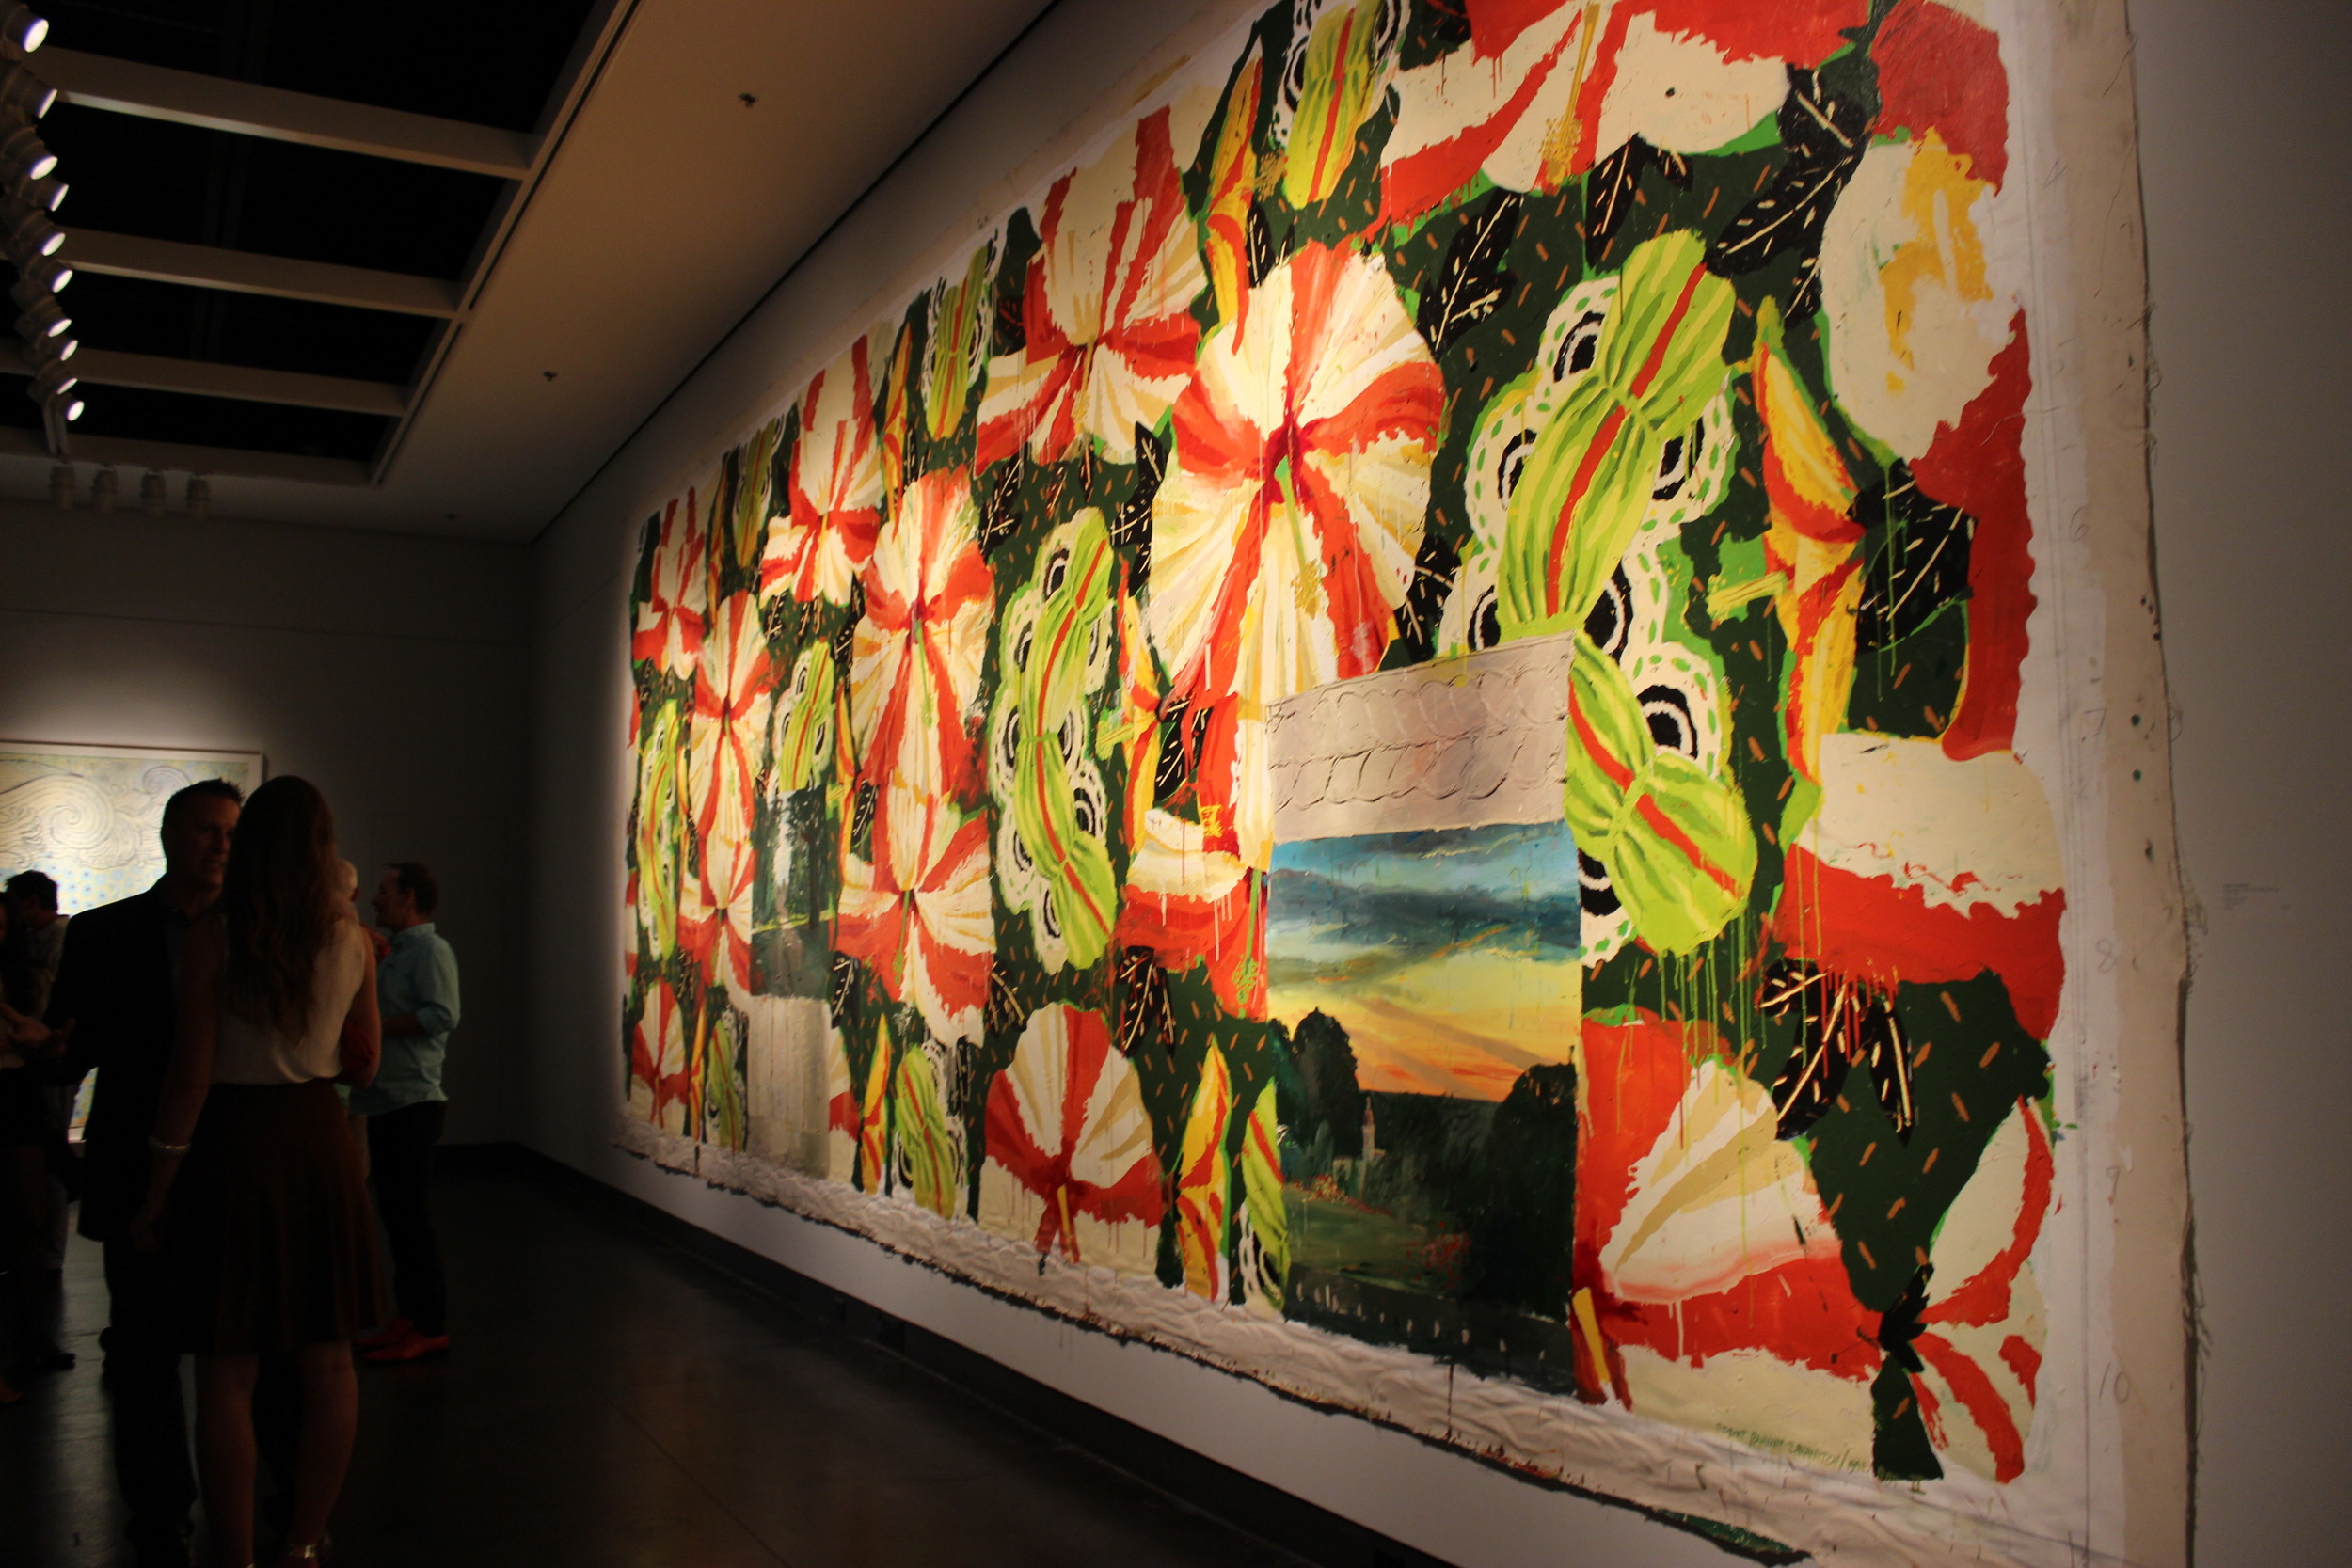 A 32-foot piece by Robert Zakanitch part of the “BLOOM” exhibition at the J. Johnson Gallery.